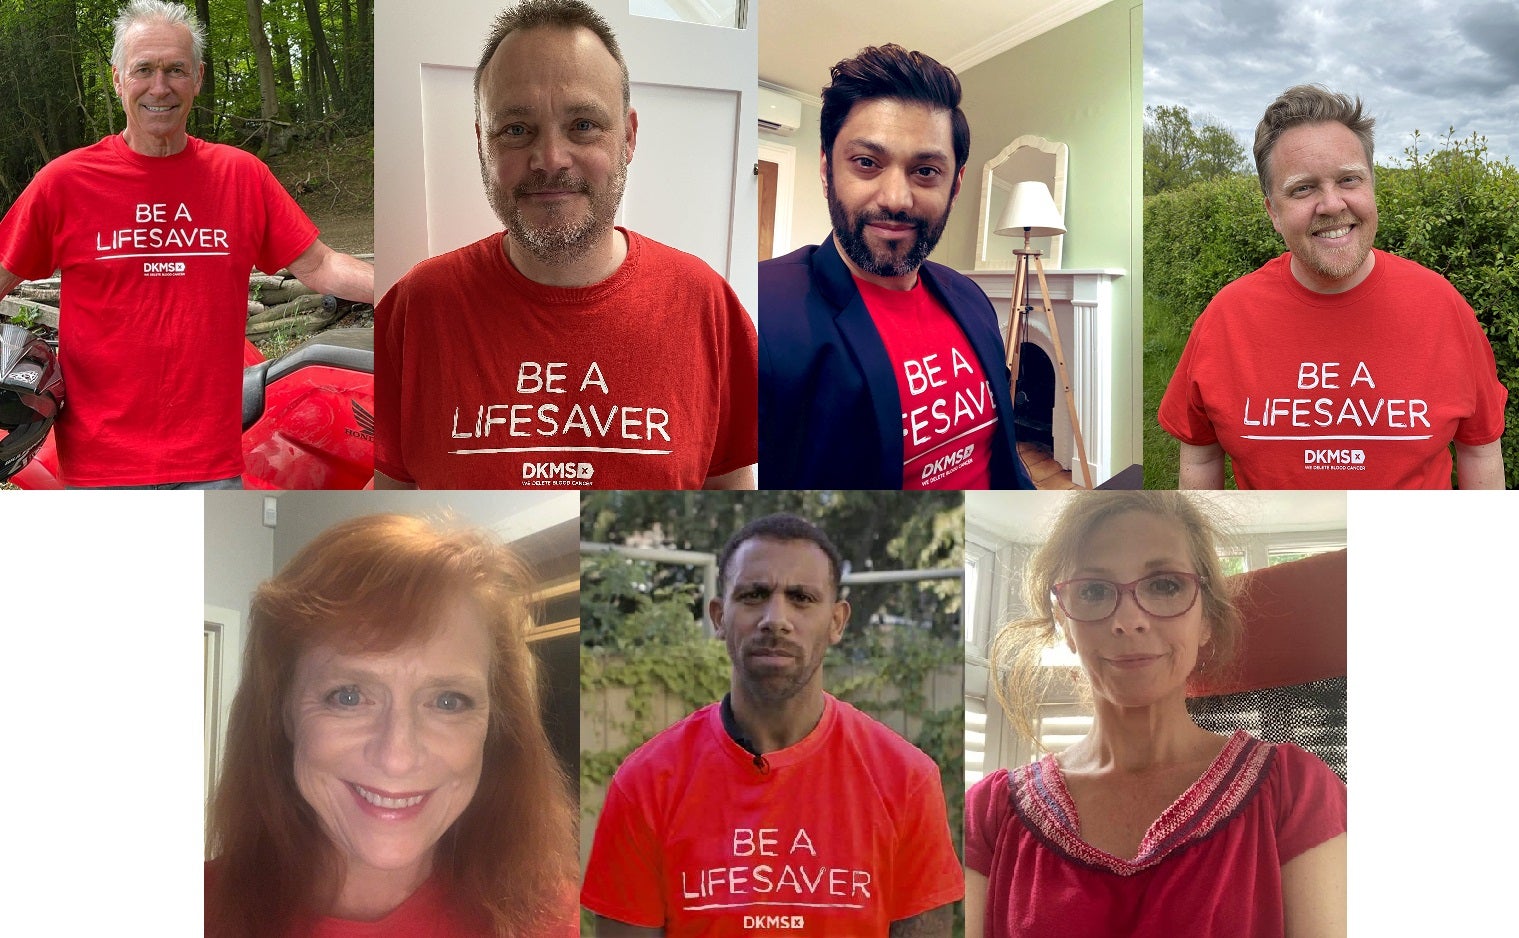 Celebs Wear It Red for DKMS on World Blood Cancer Day